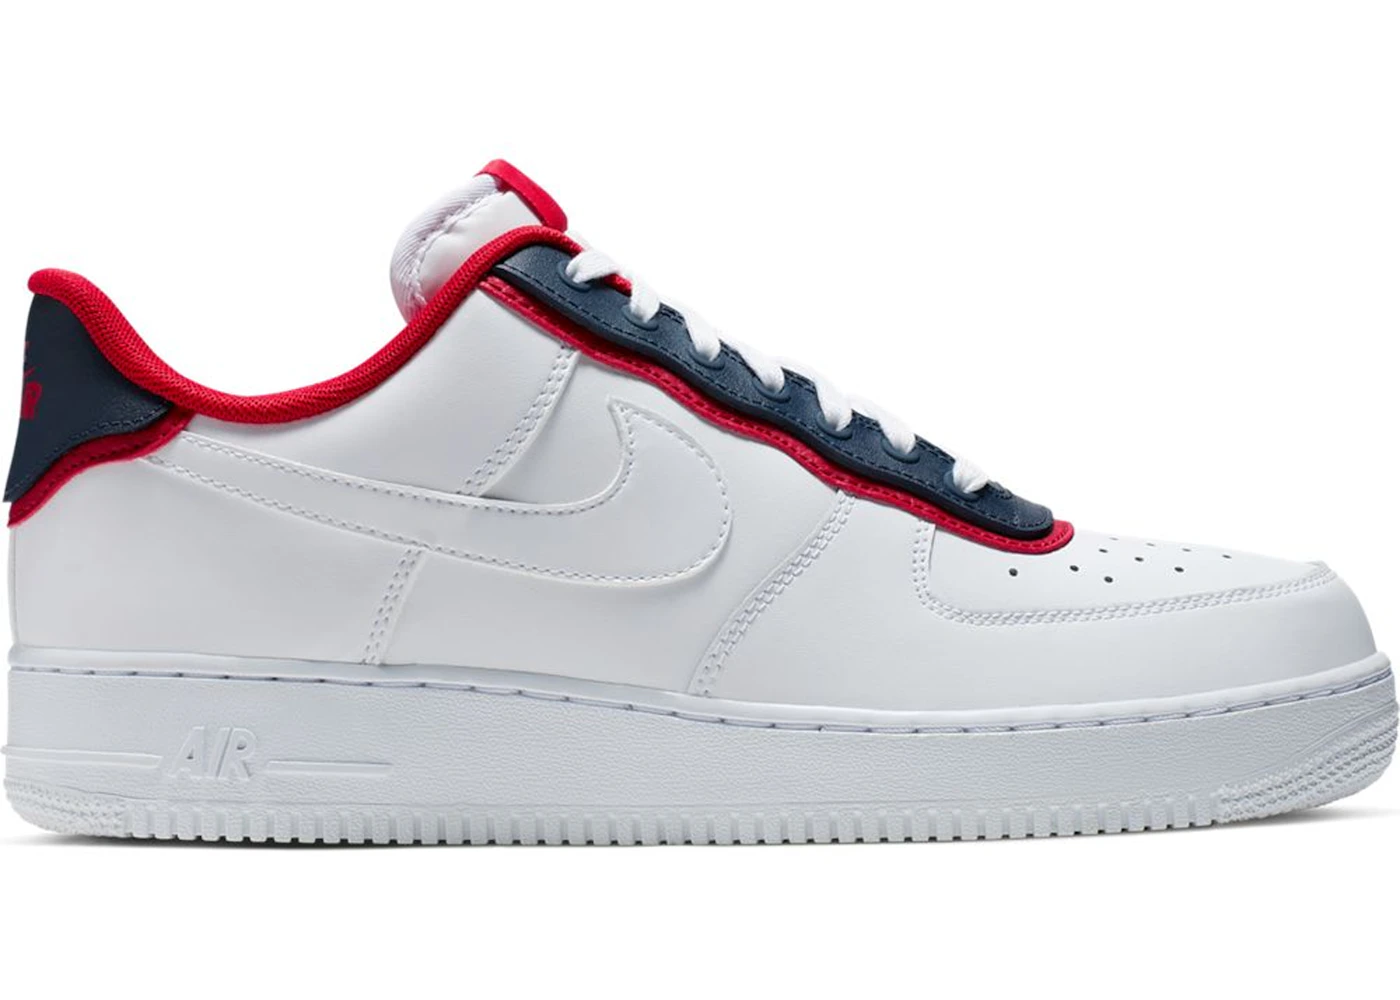 Nike Air Force 1 Low Double Layer White Obsidian Red - Ao2439-100 - Us